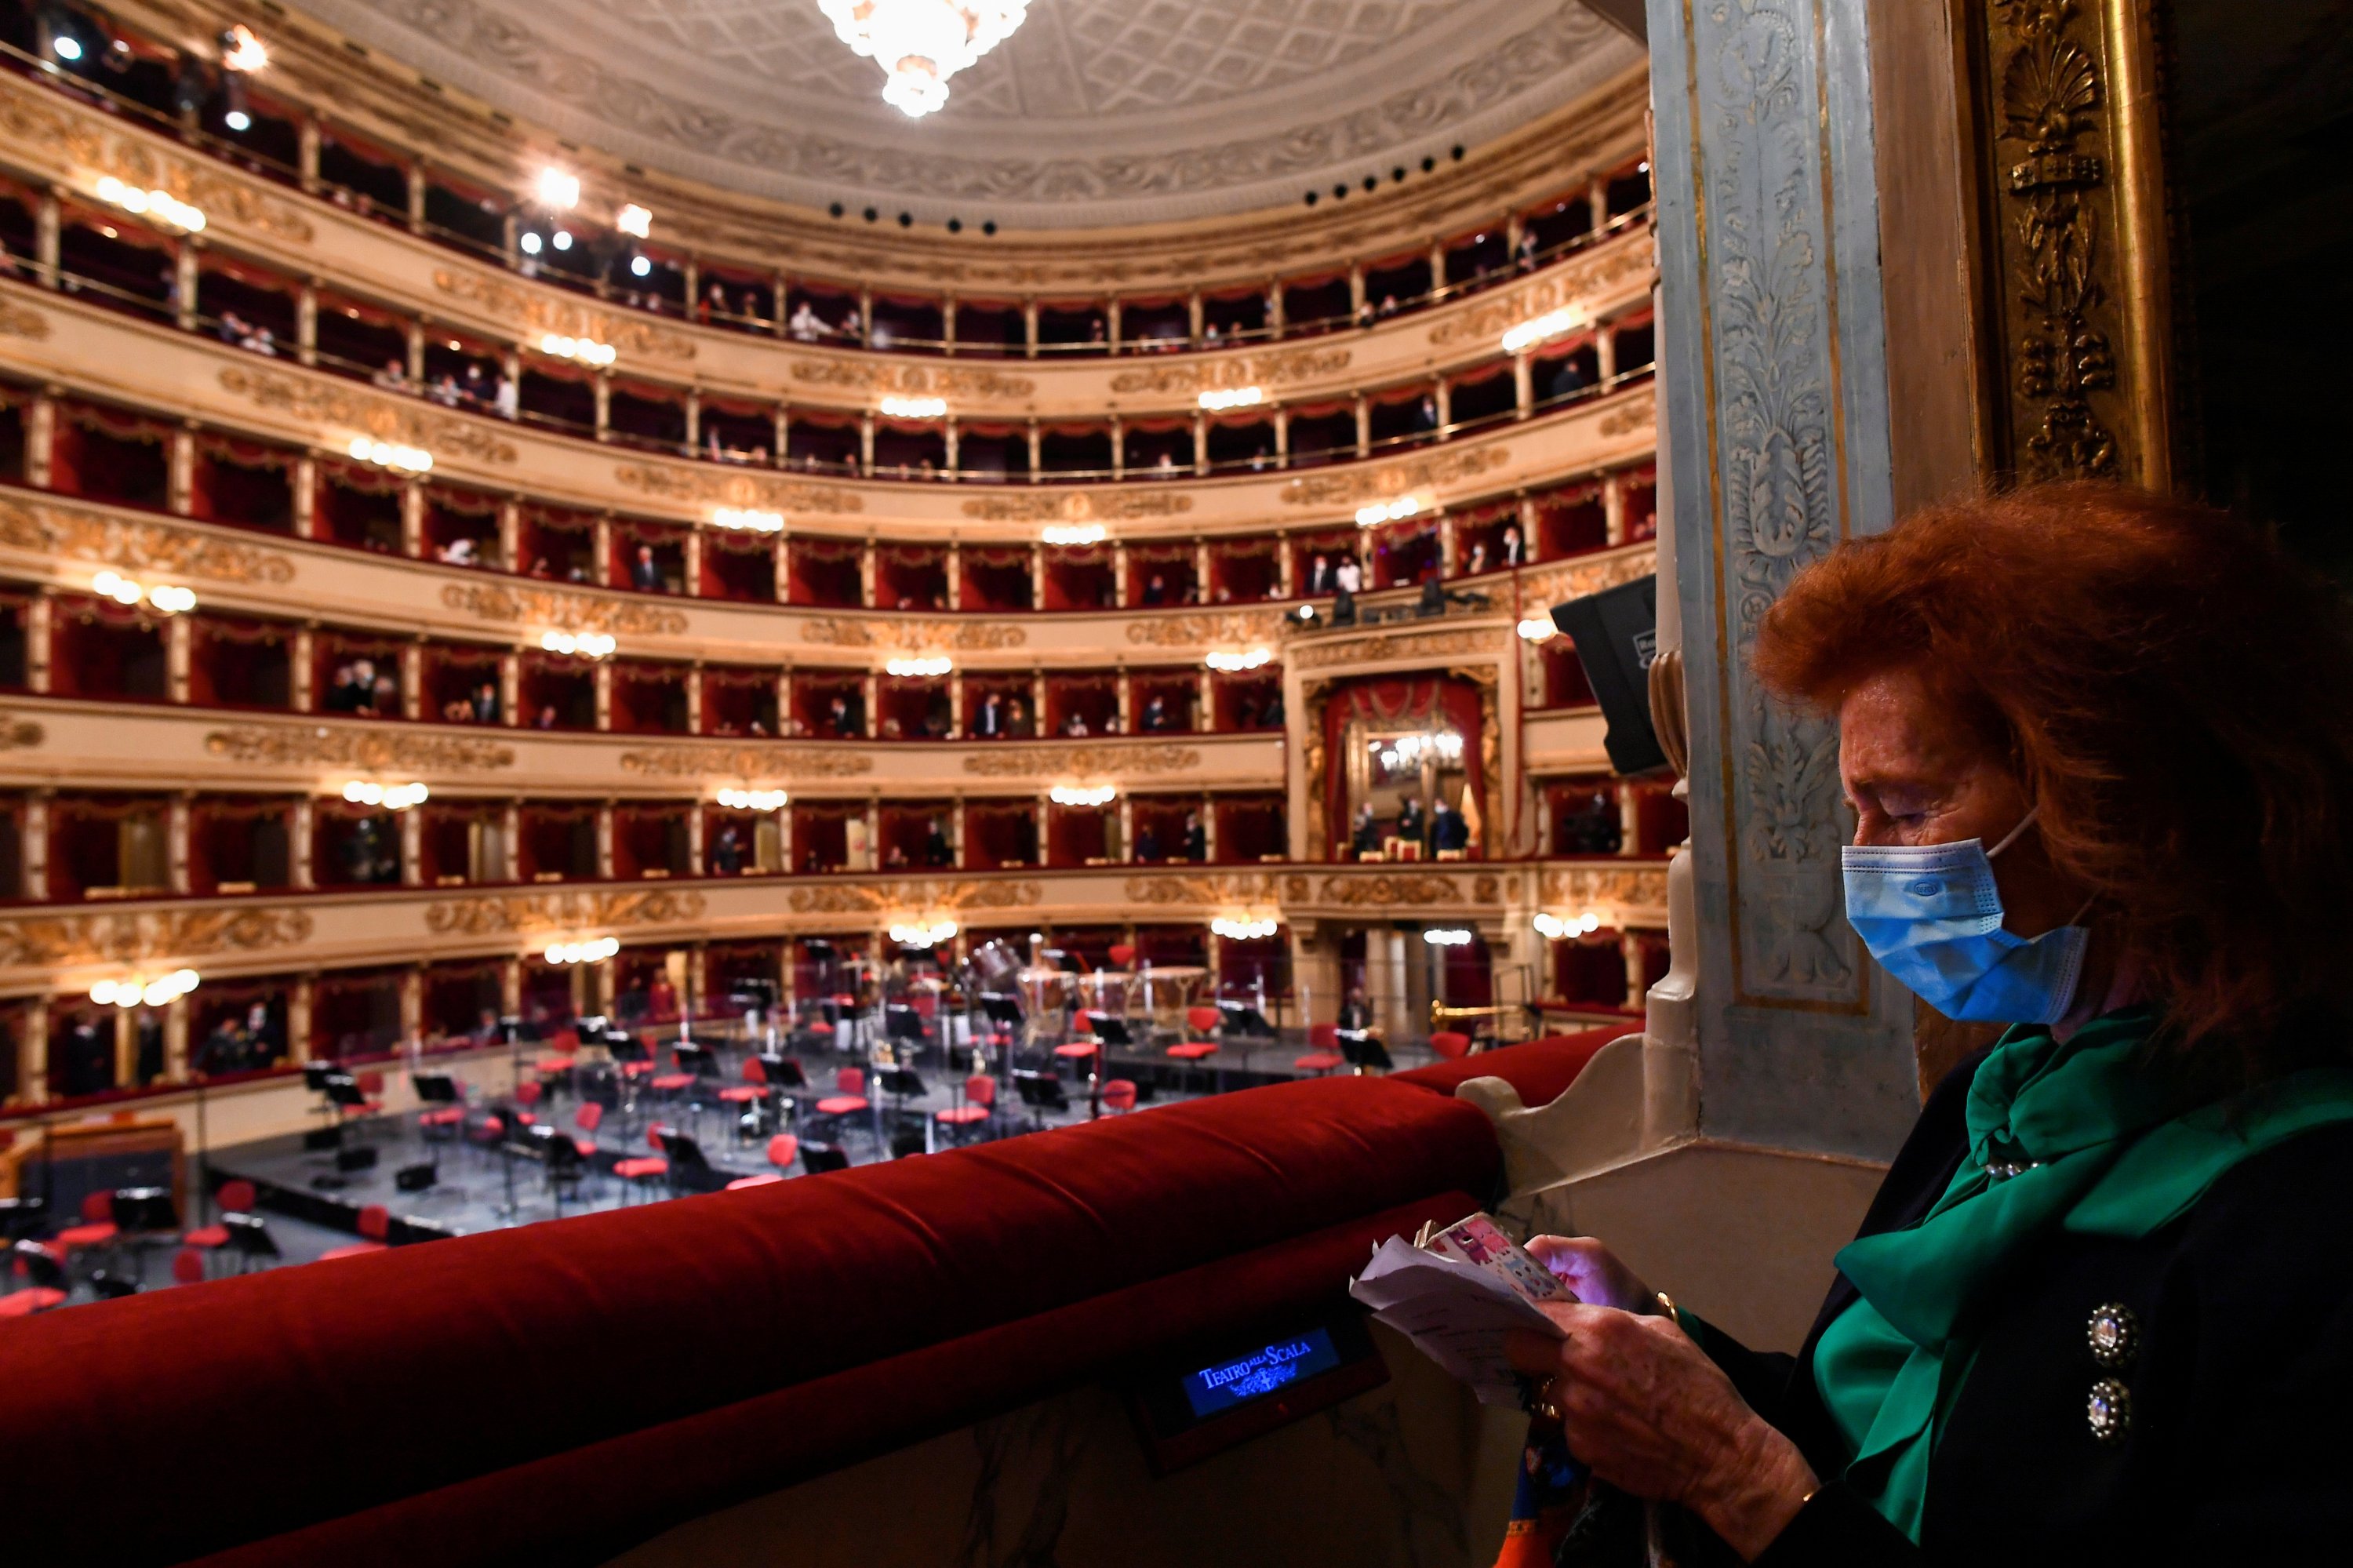 People take their seats at the La Scala opera house, Milan, Italy, May 10, 2021. (REUTERS Photo)